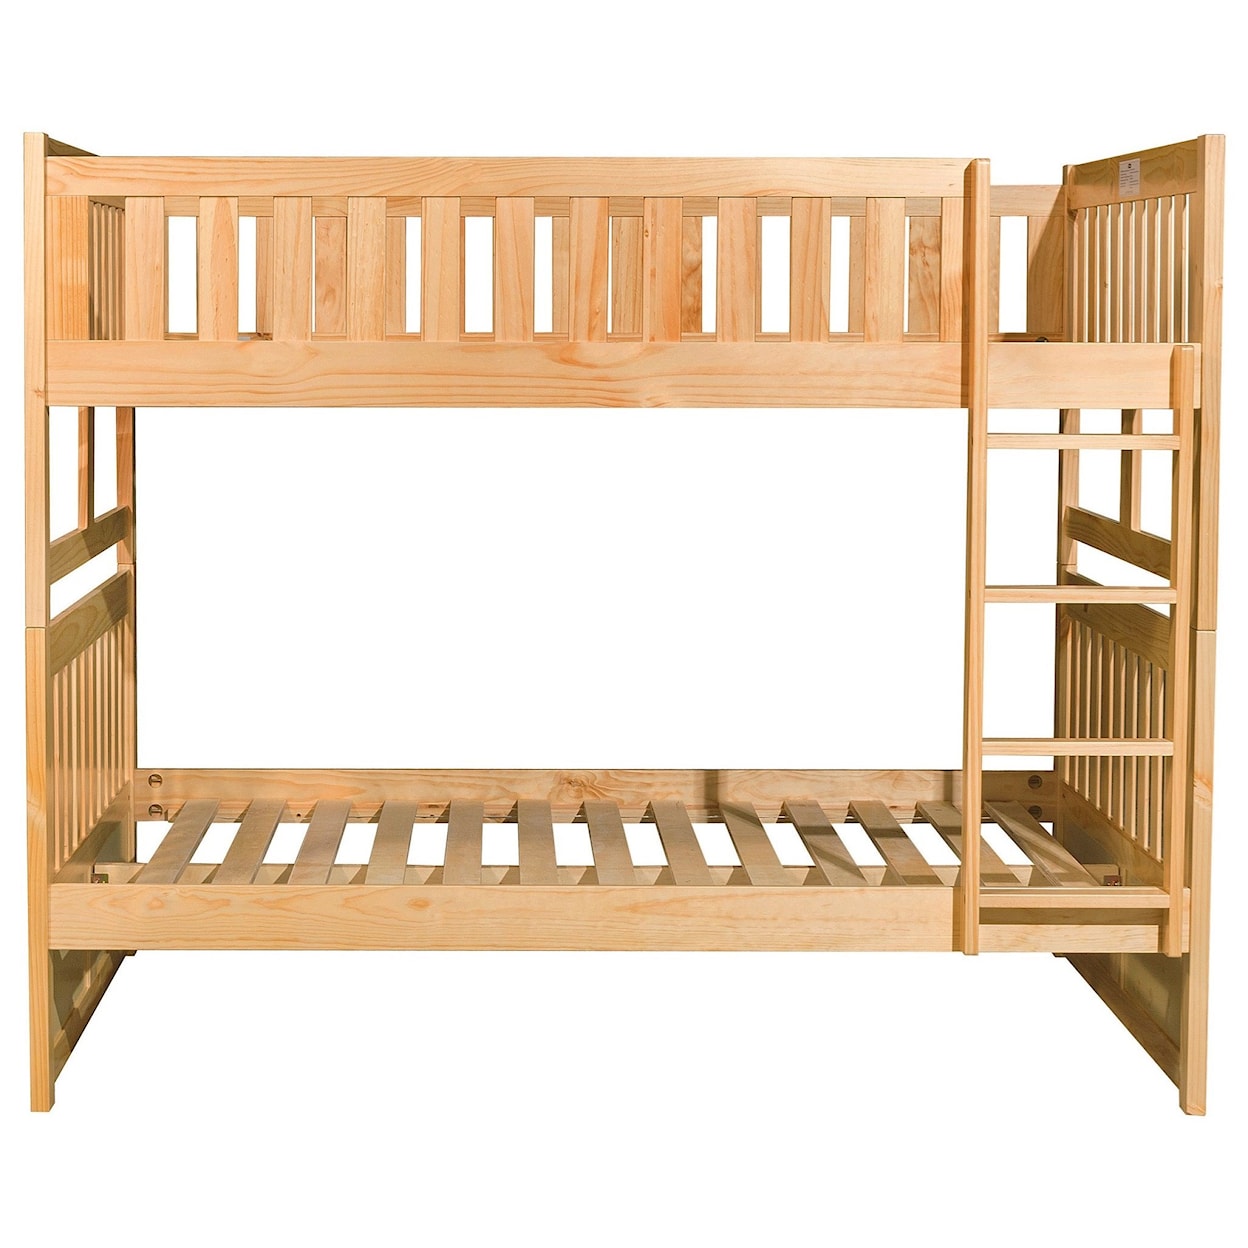 Home Style Natural Full over Full Bunk Bed